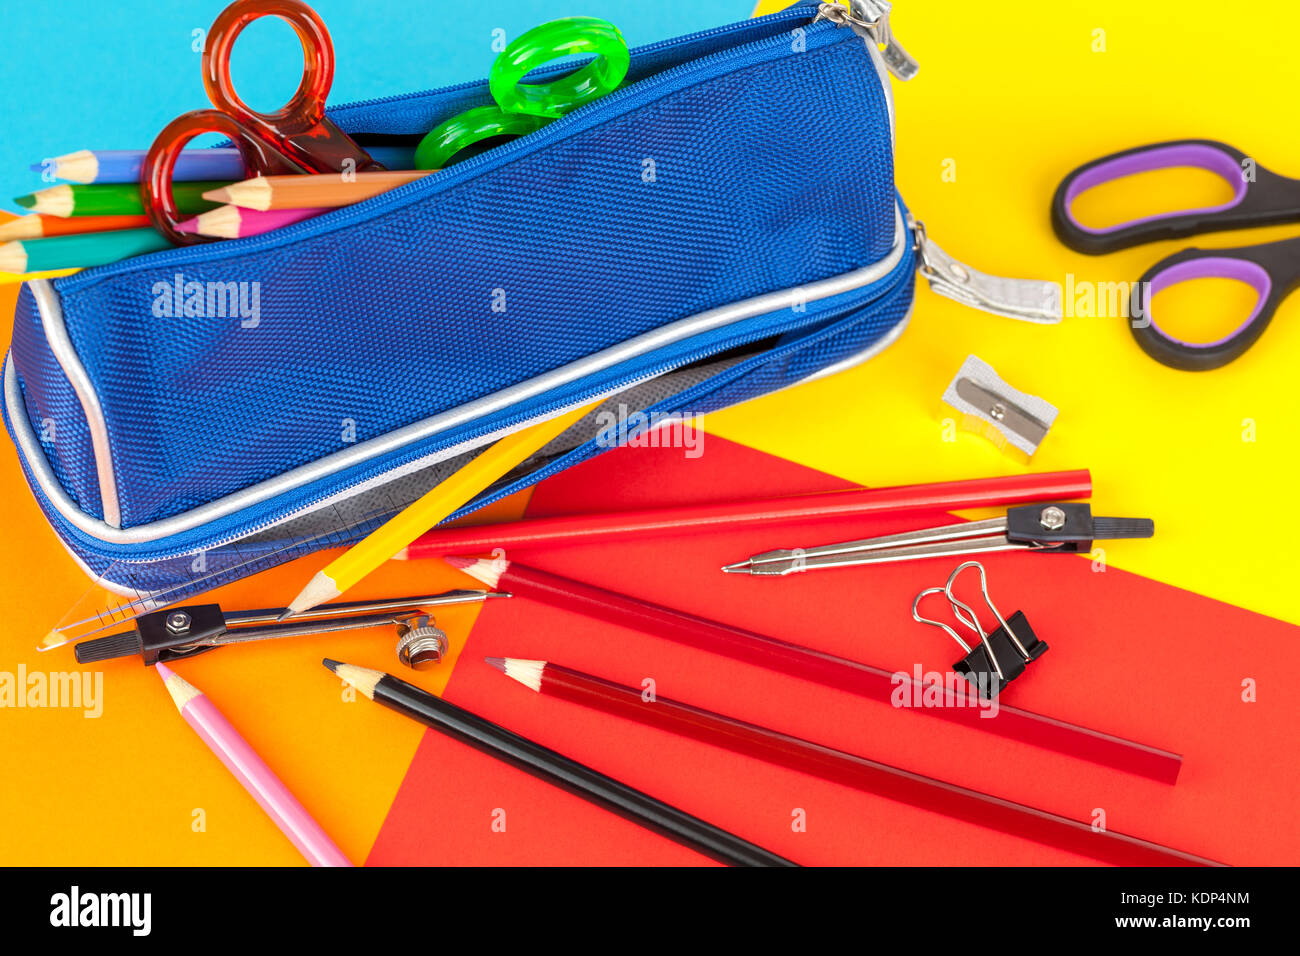 Blue pencil case full of colouring pencils and scissors on a colourful card background Stock Photo